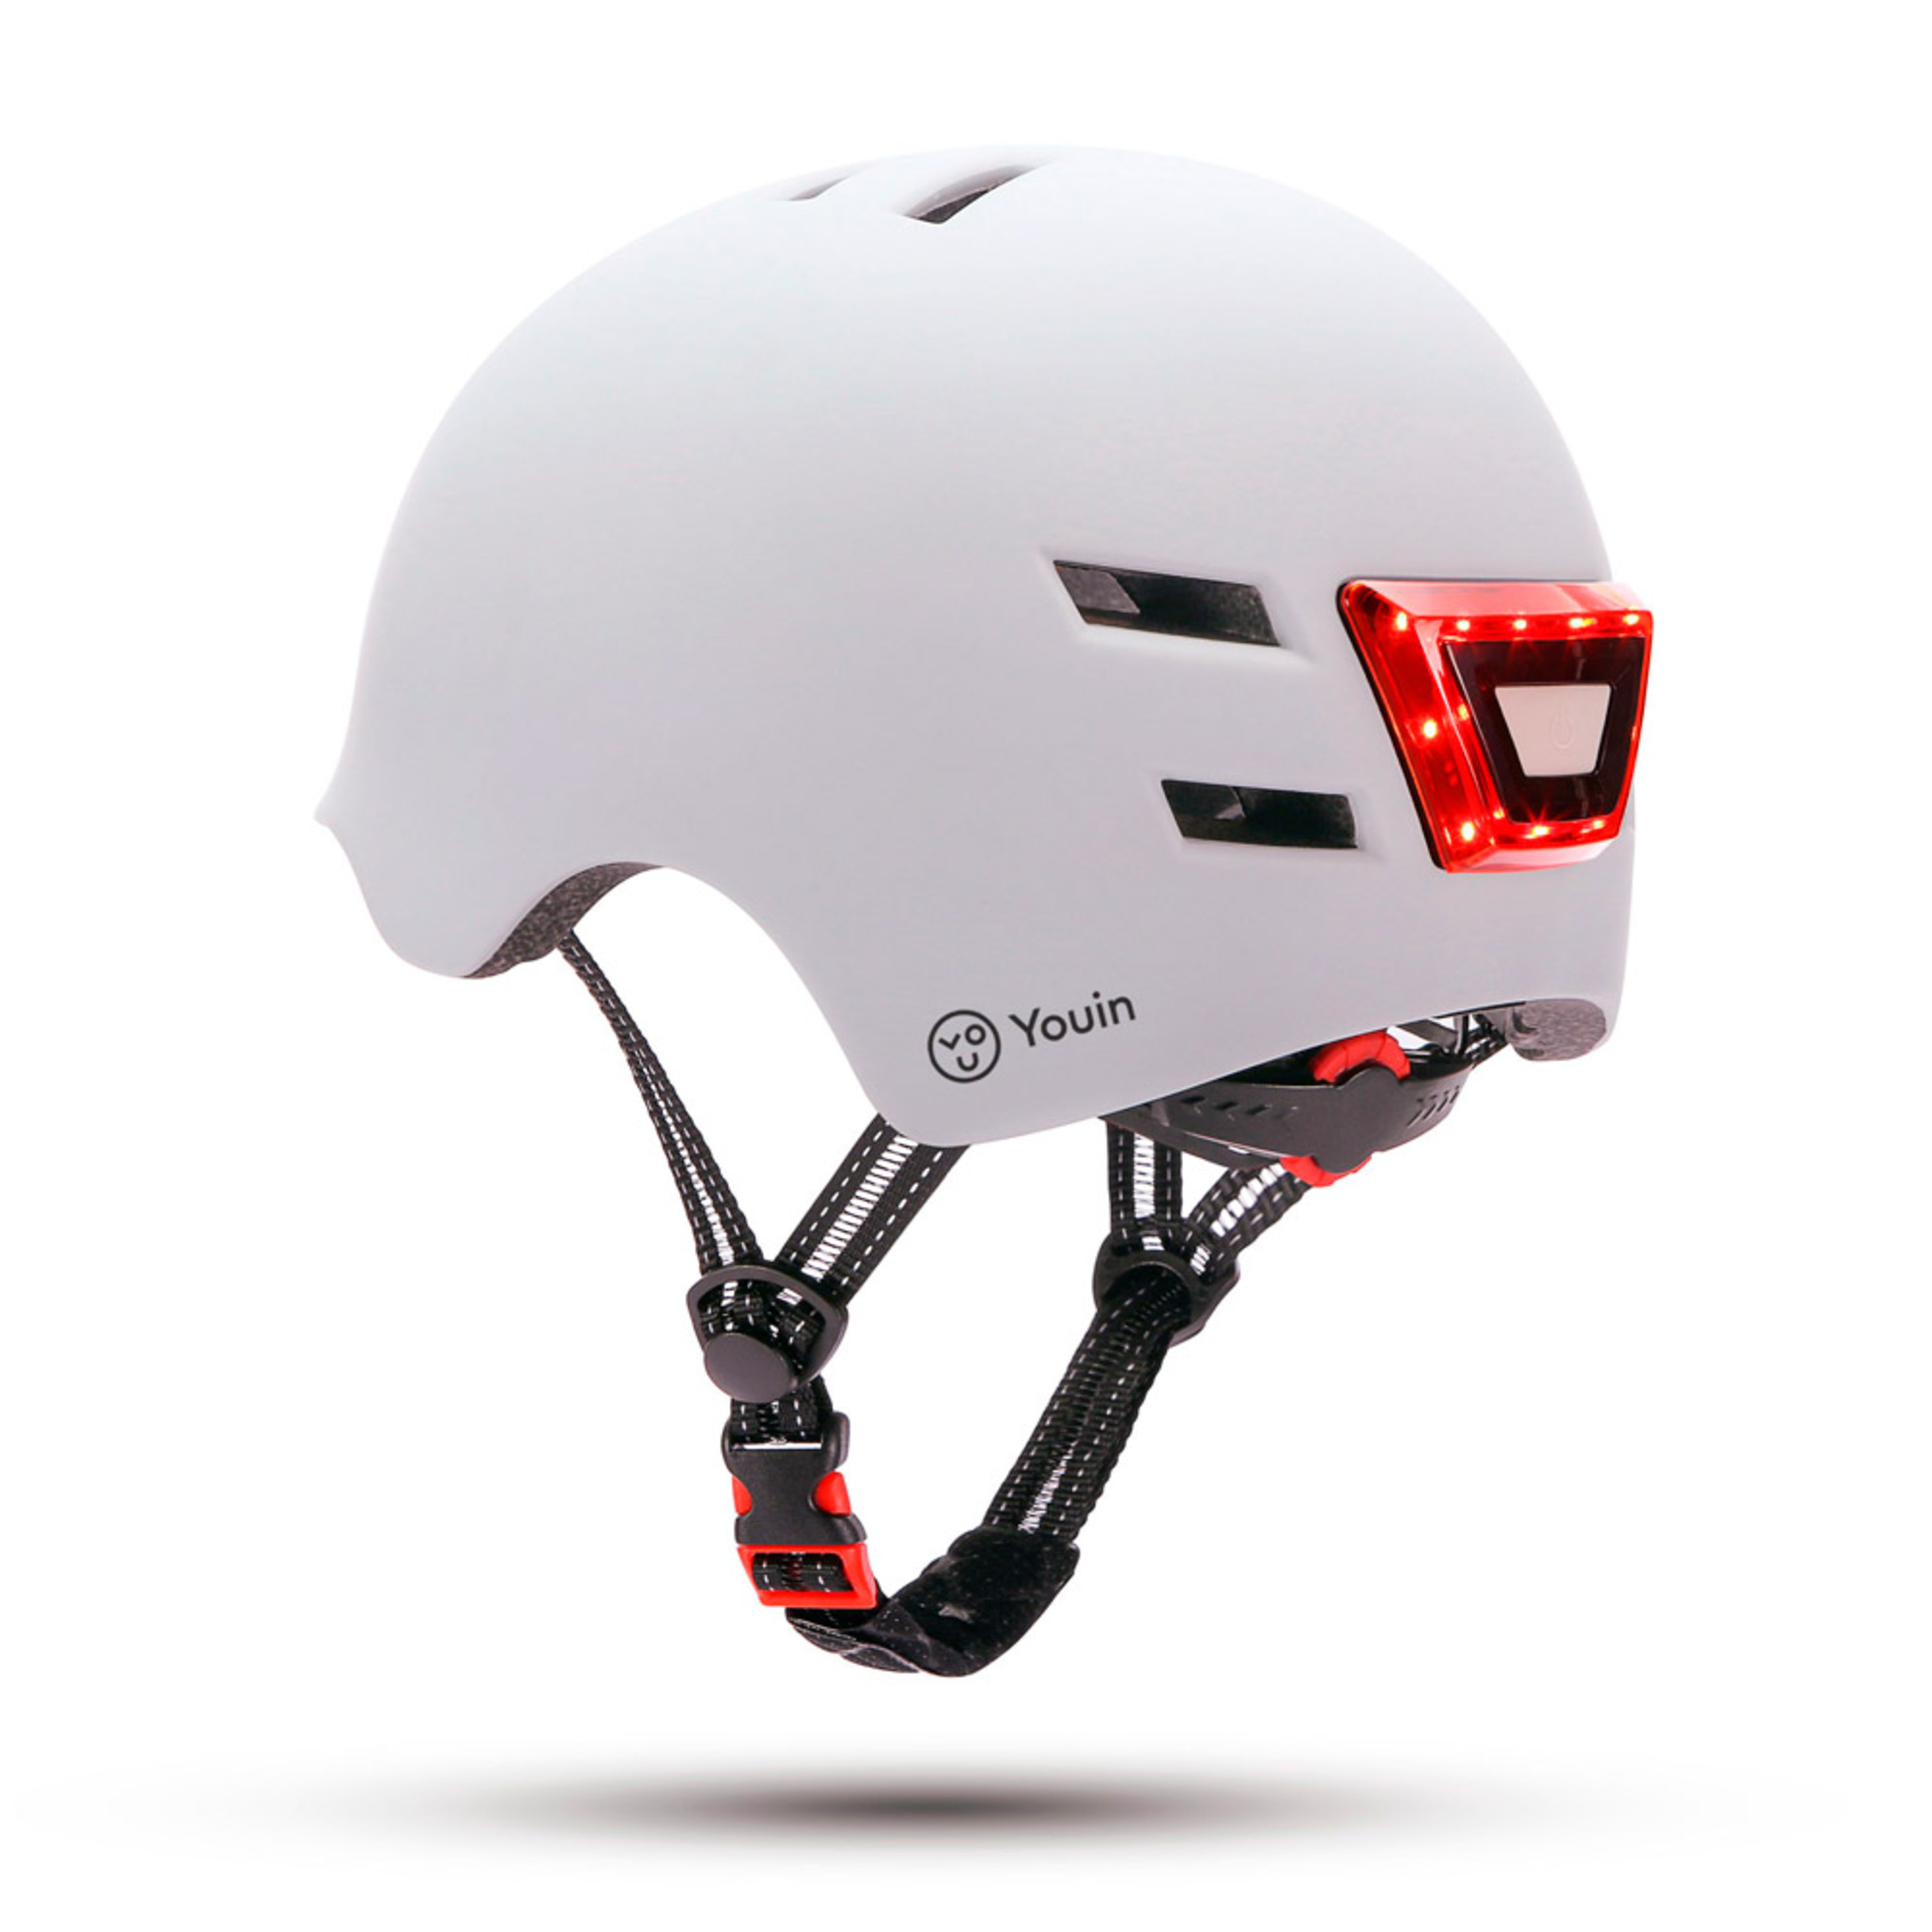 Casco Youin Con Luces Led Frontal Y Trasera Ajustable